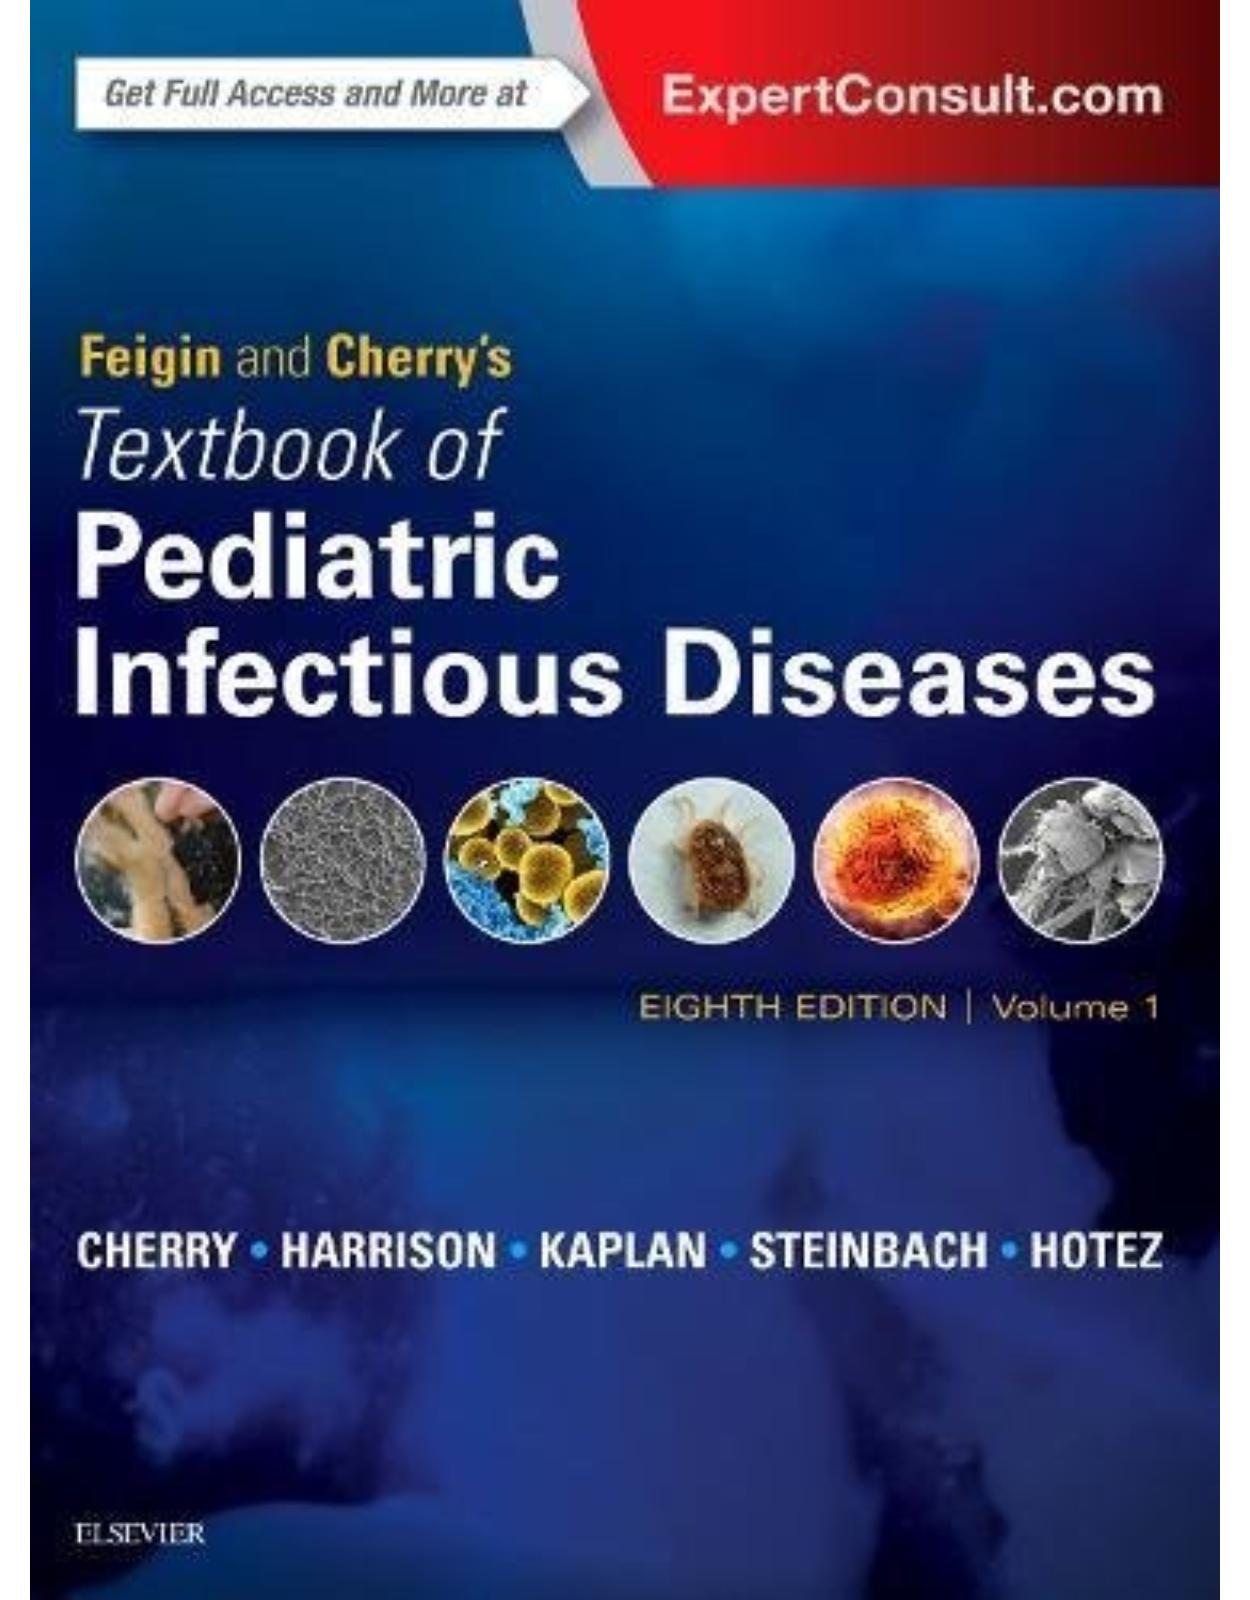 Feigin and Cherry’s Textbook of Pediatric Infectious Diseases, 8th Edition